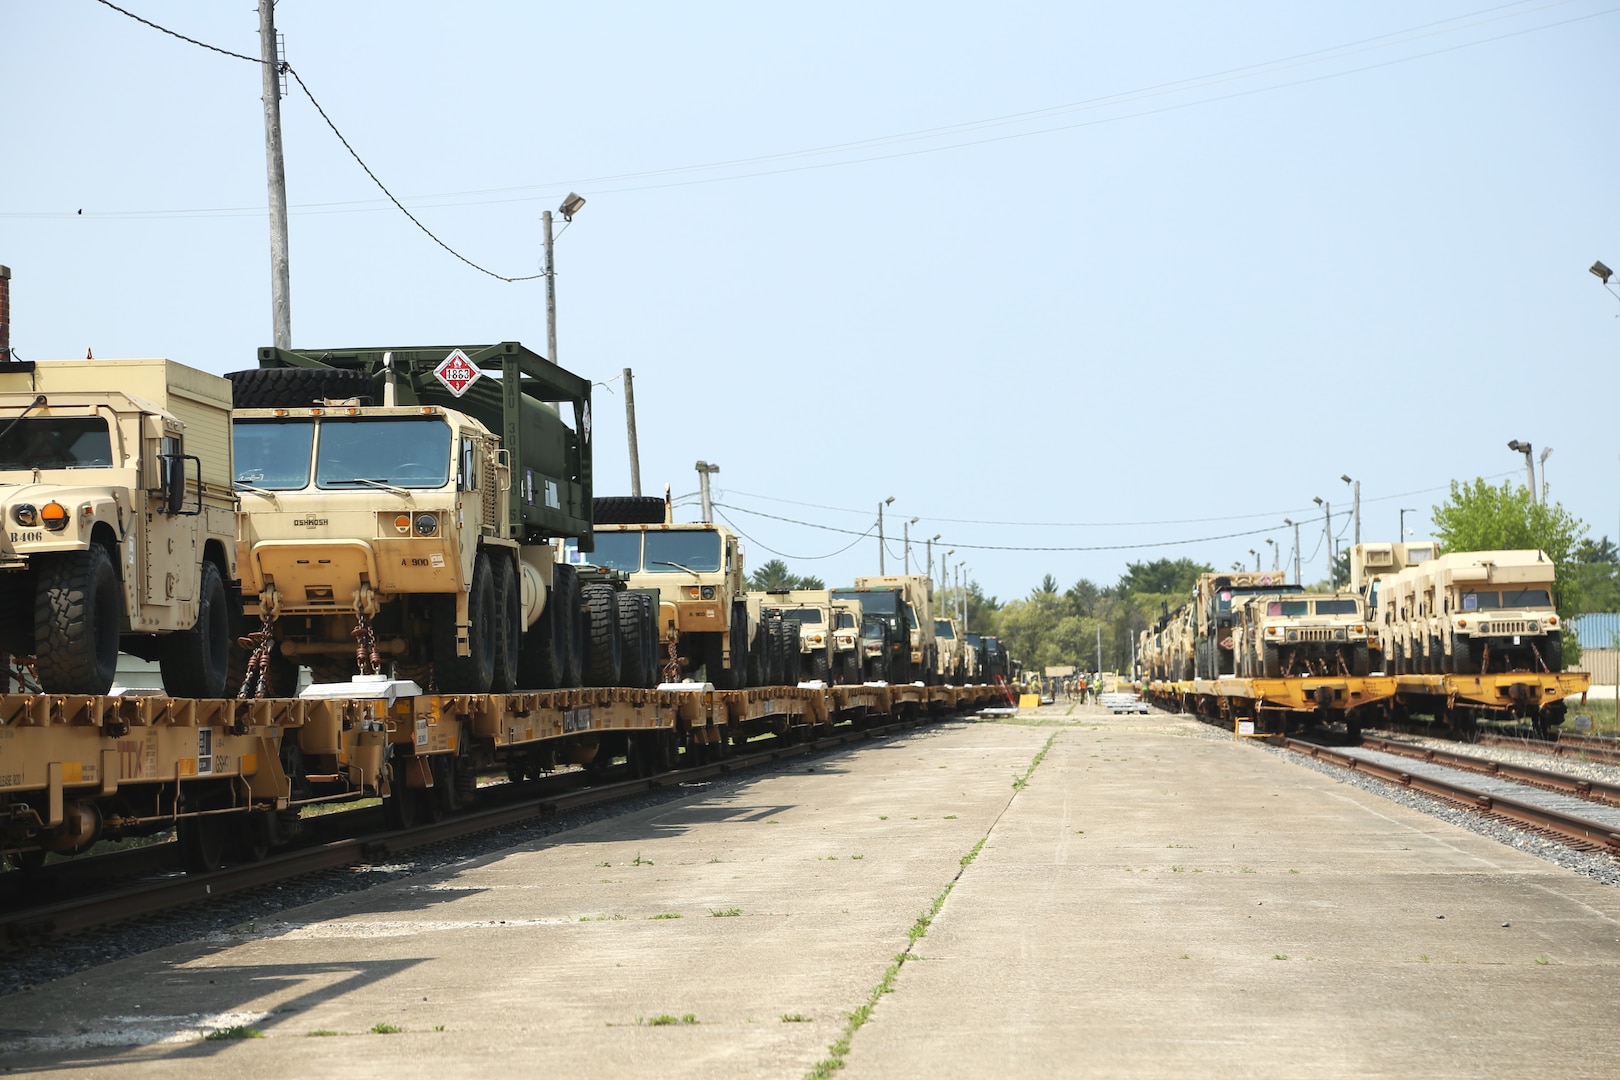 Soldiers with the Wisconsin National Guard’s 32nd Infantry Brigade Combat Team (IBCT) conduct a rail movement May 14, 2024, that includes more than 800 pieces of equipment on nearly 200 railcars at the railyard at Fort McCoy, Wis. Warrant Officer 1 Eric Frank with the 32nd IBCT who helped plan the movement, said this was “the largest rail movement with civilian linehaul the Wisconsin National Guard has ever done.” The 32nd is completing the operation to move the vehicles and equipment for a future training rotation. Unit movement officers with the 32nd coordinated the plans to complete the movement. Fort McCoy’s Logistics Readiness Center Transportation Division and associated rail operations team personnel supported the effort. (U.S. Army Photo by Scott T. Sturkol, Public Affairs Office, Fort McCoy, Wis.)